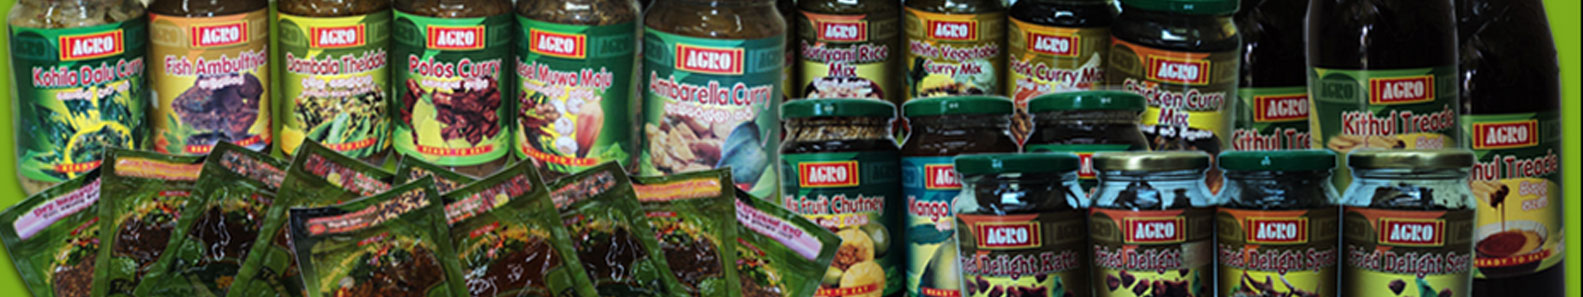 AGRO SPICE FOOD PACKERS PVT LTD